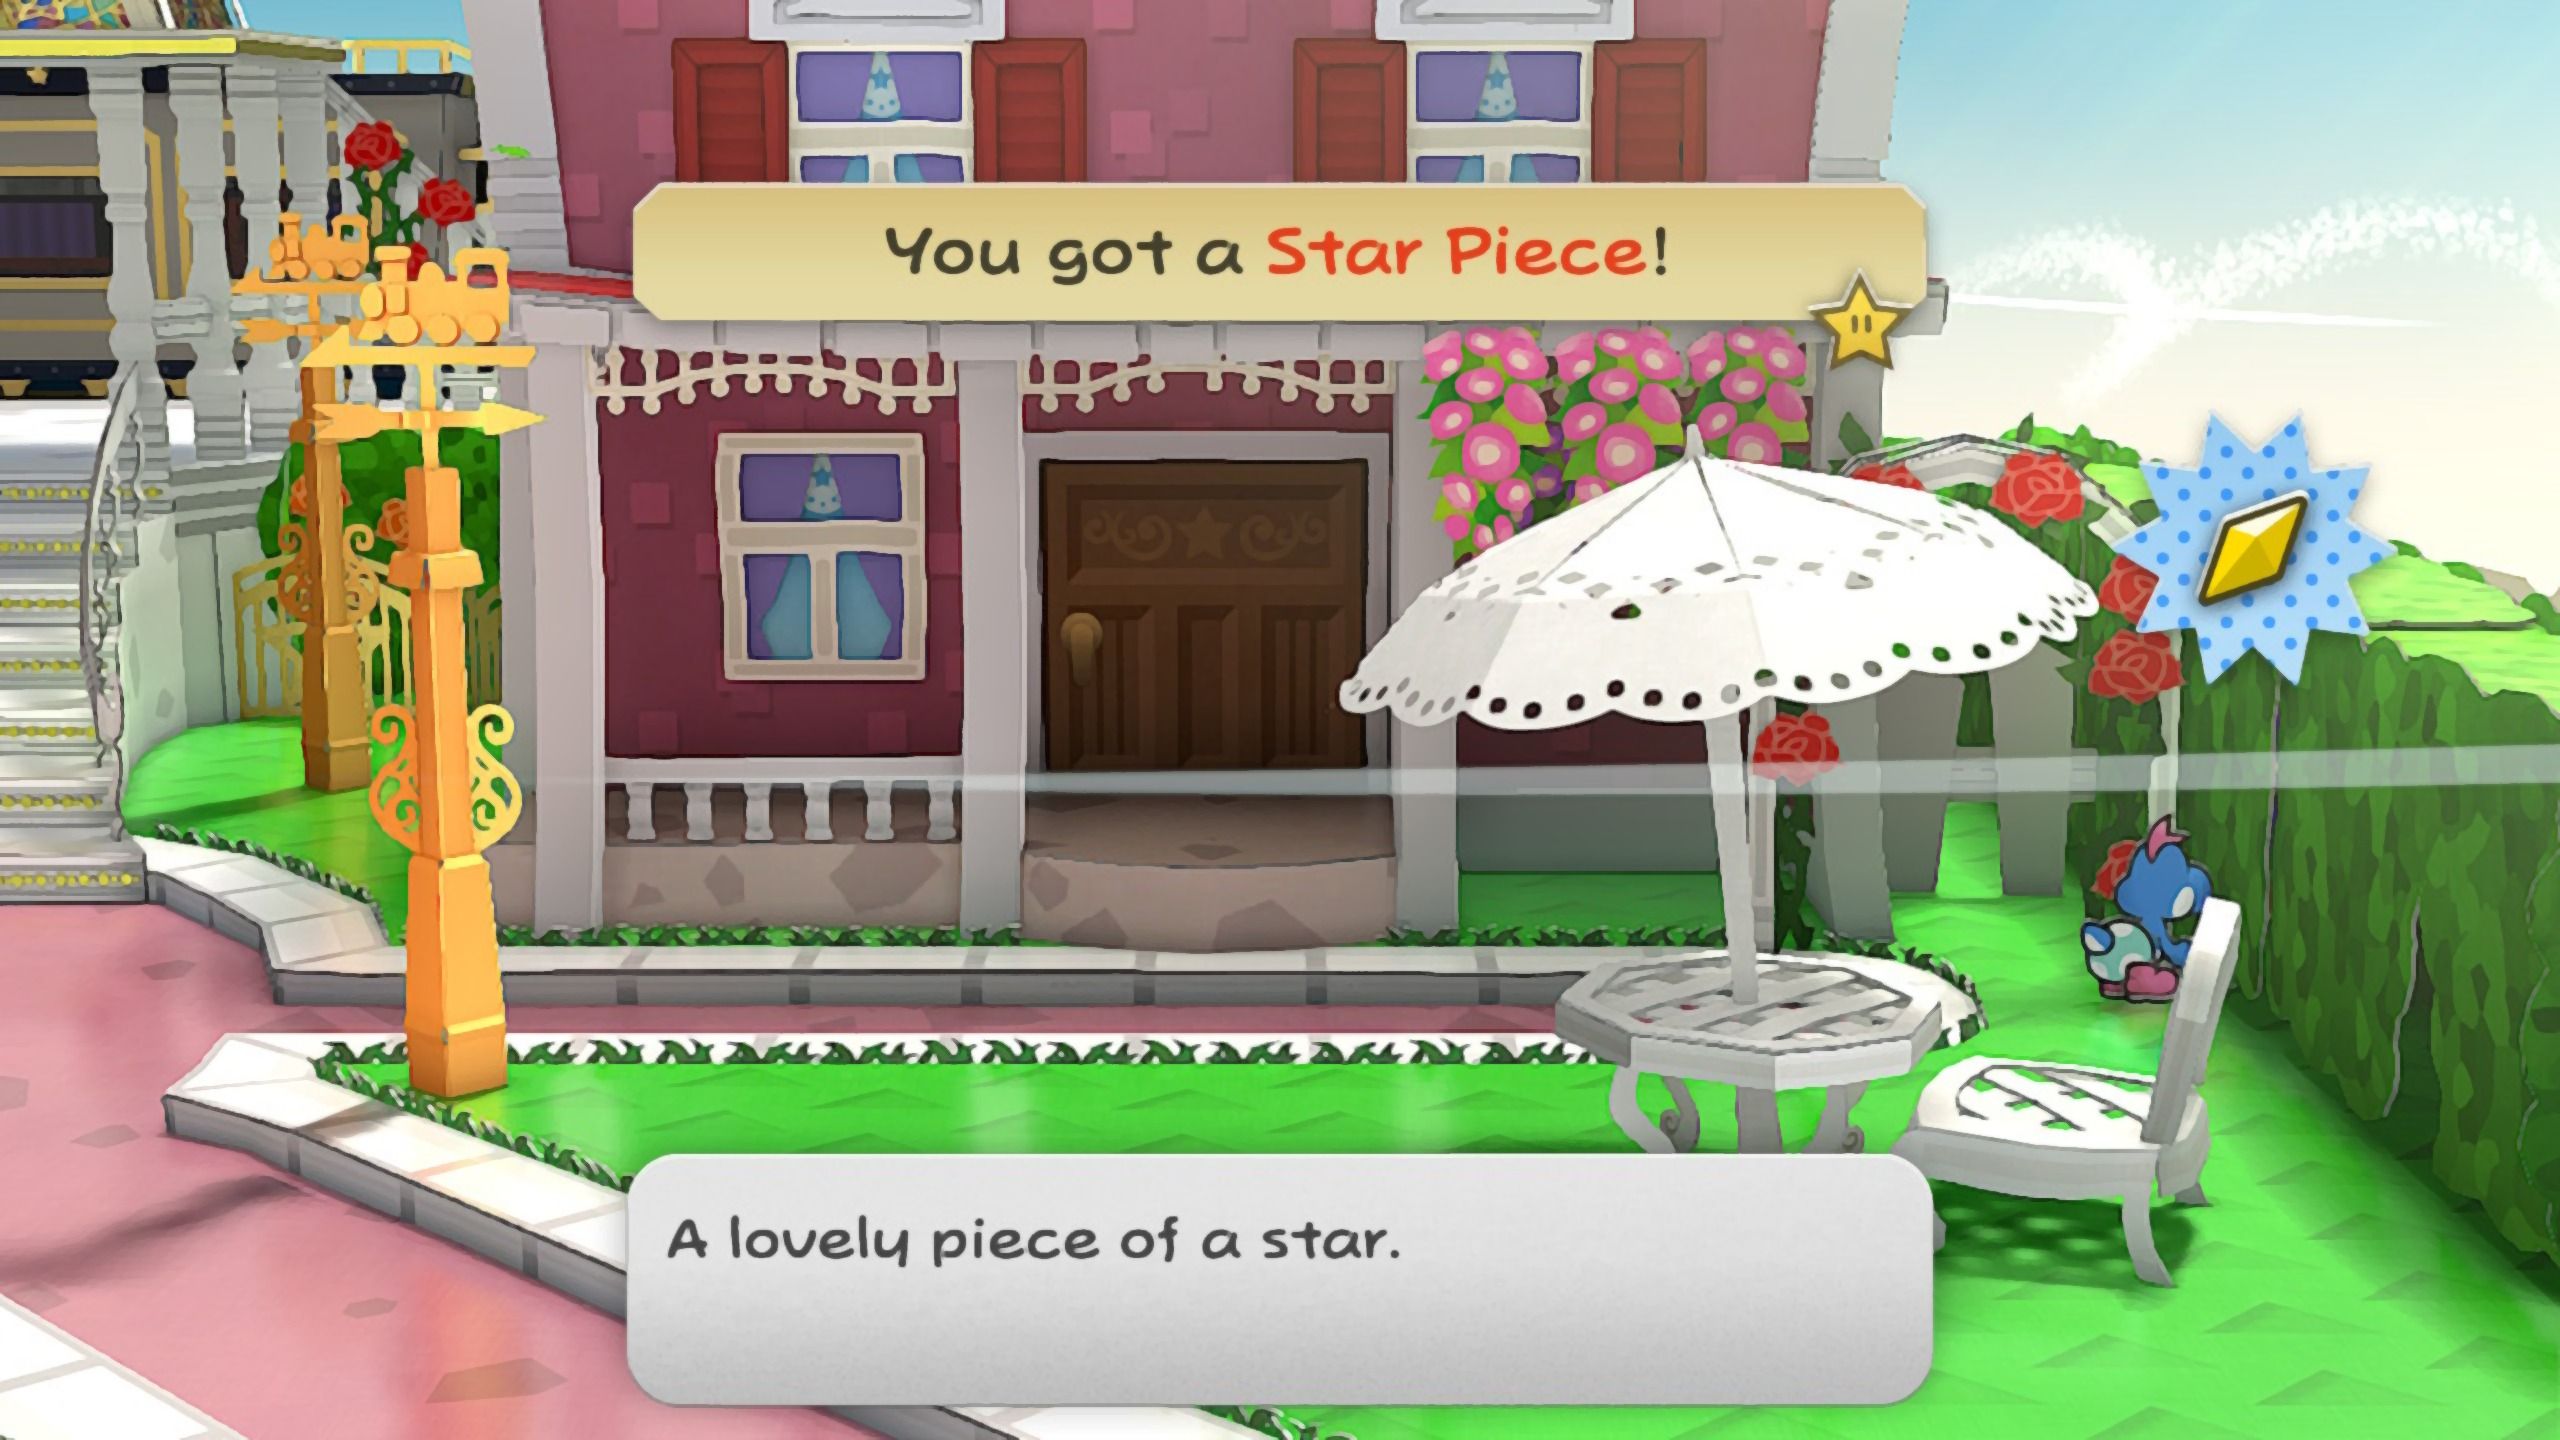 Image of the star piece near Toodles' house in Paper Mario TTYD